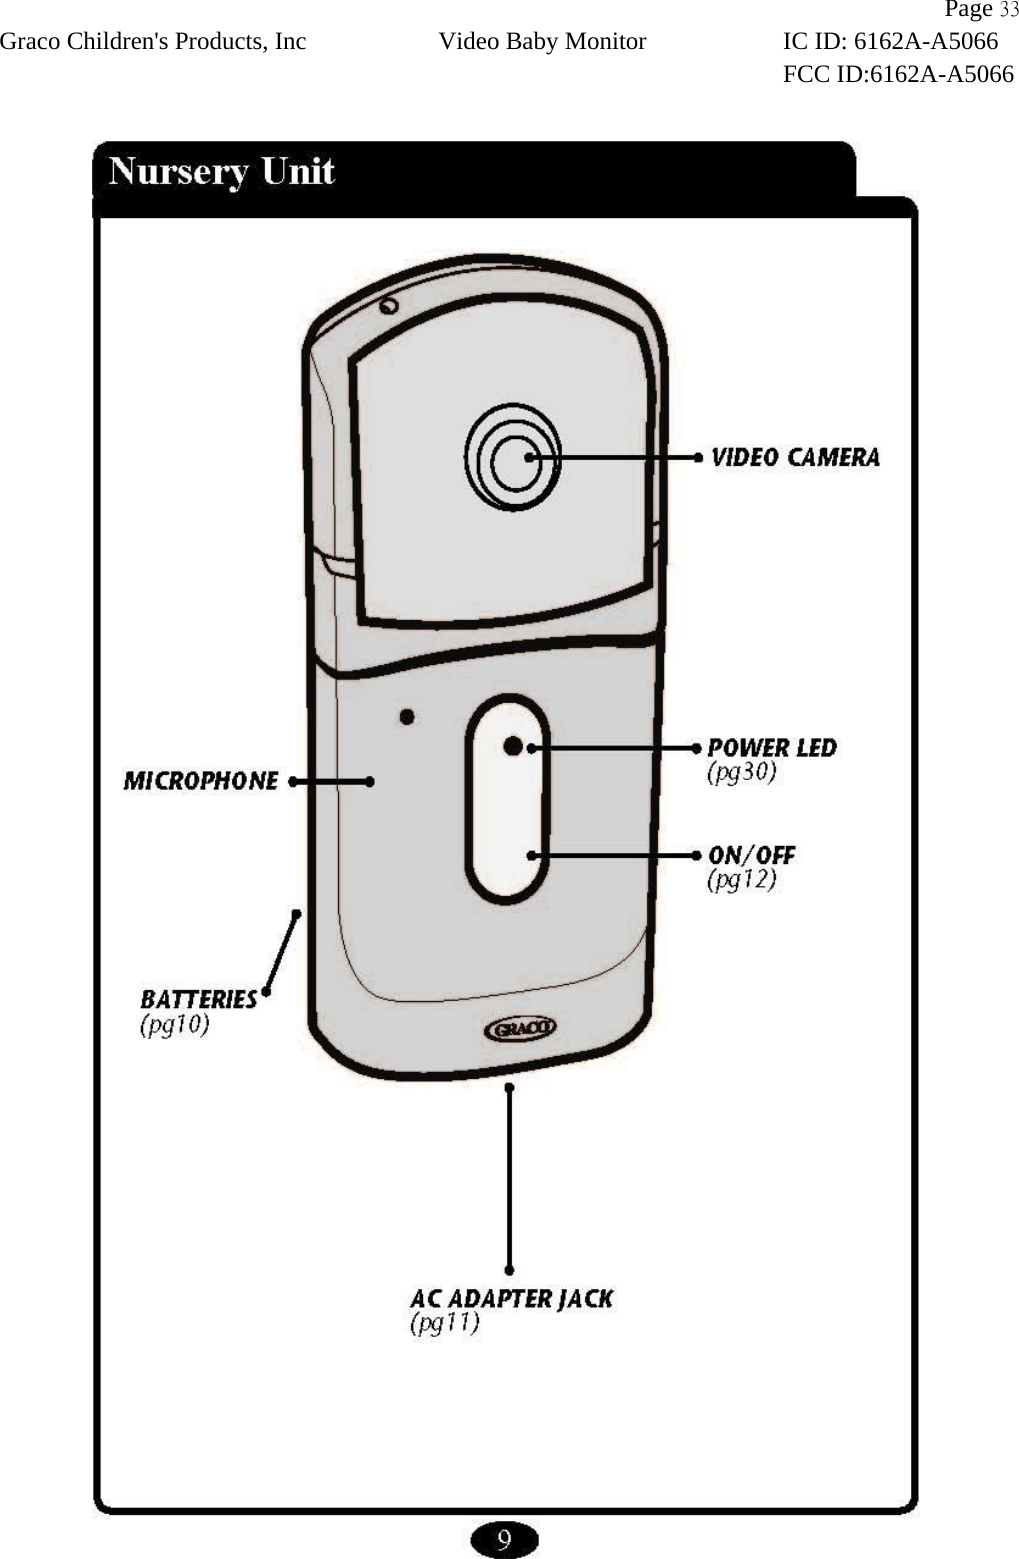                Page 33 Graco Children&apos;s Products, Inc Video Baby Monitor IC ID: 6162A-A5066 FCC ID:6162A-A5066    